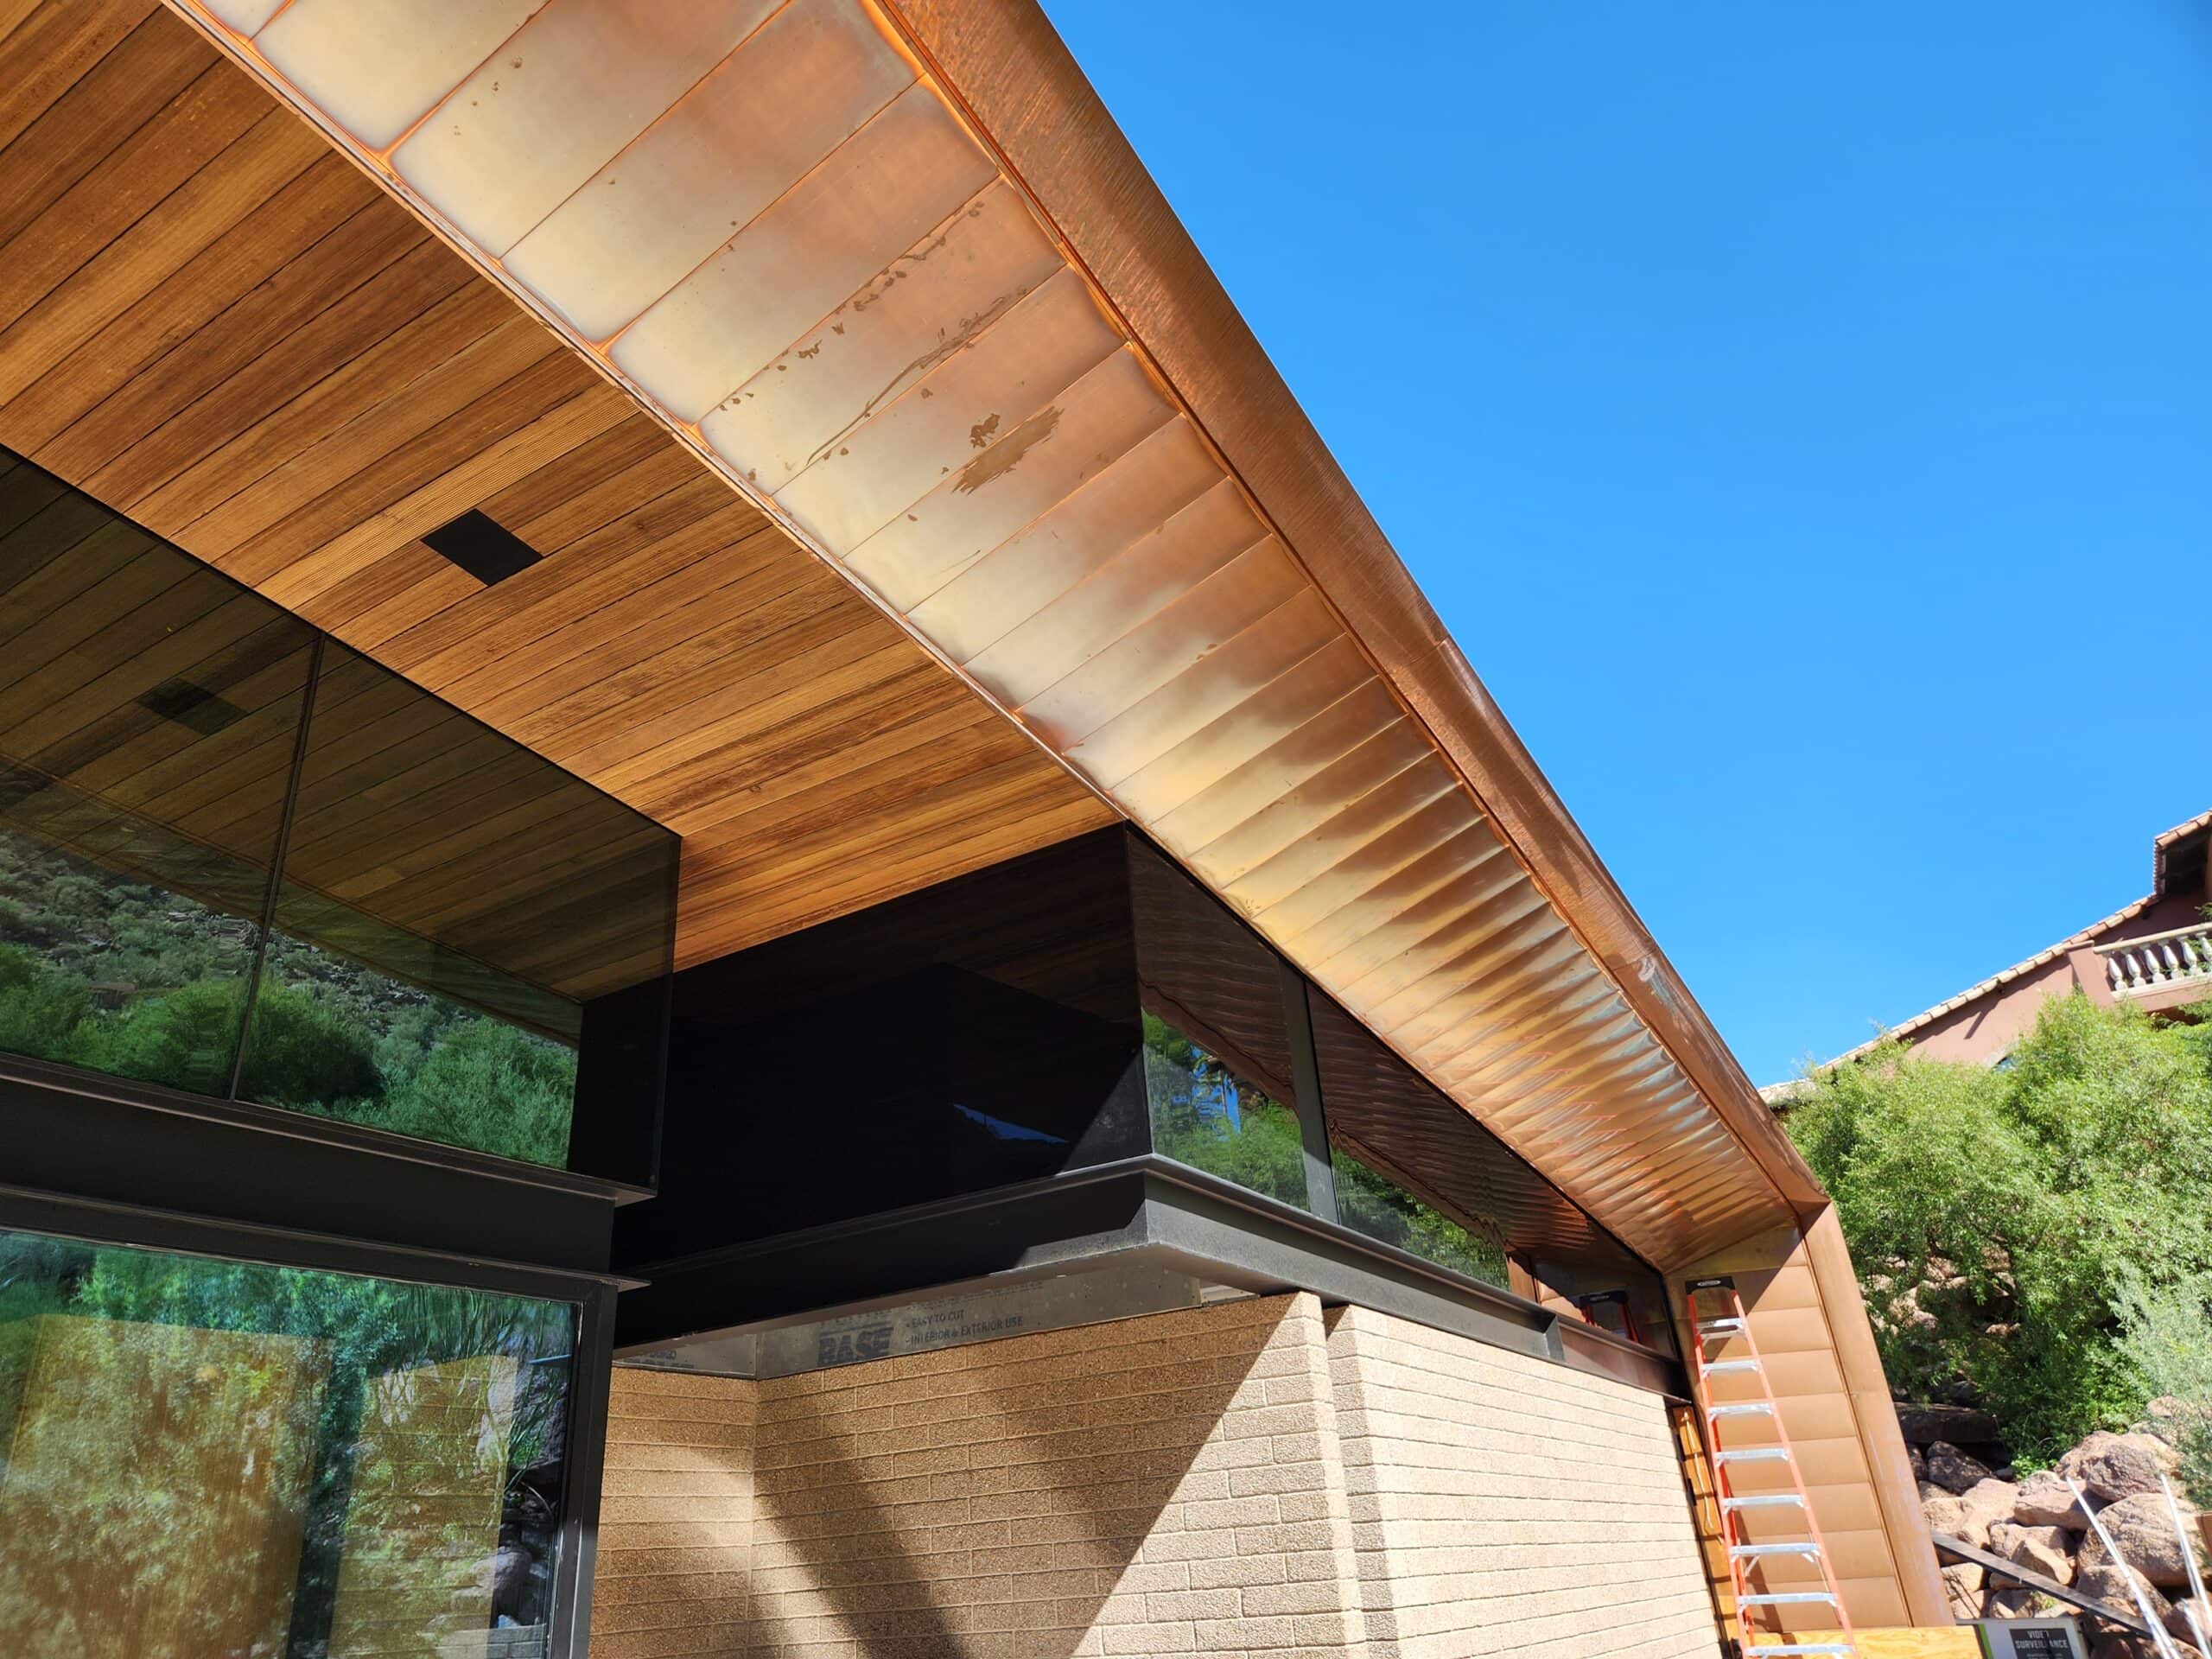 A new copper roof by behmer in Cave Creek.